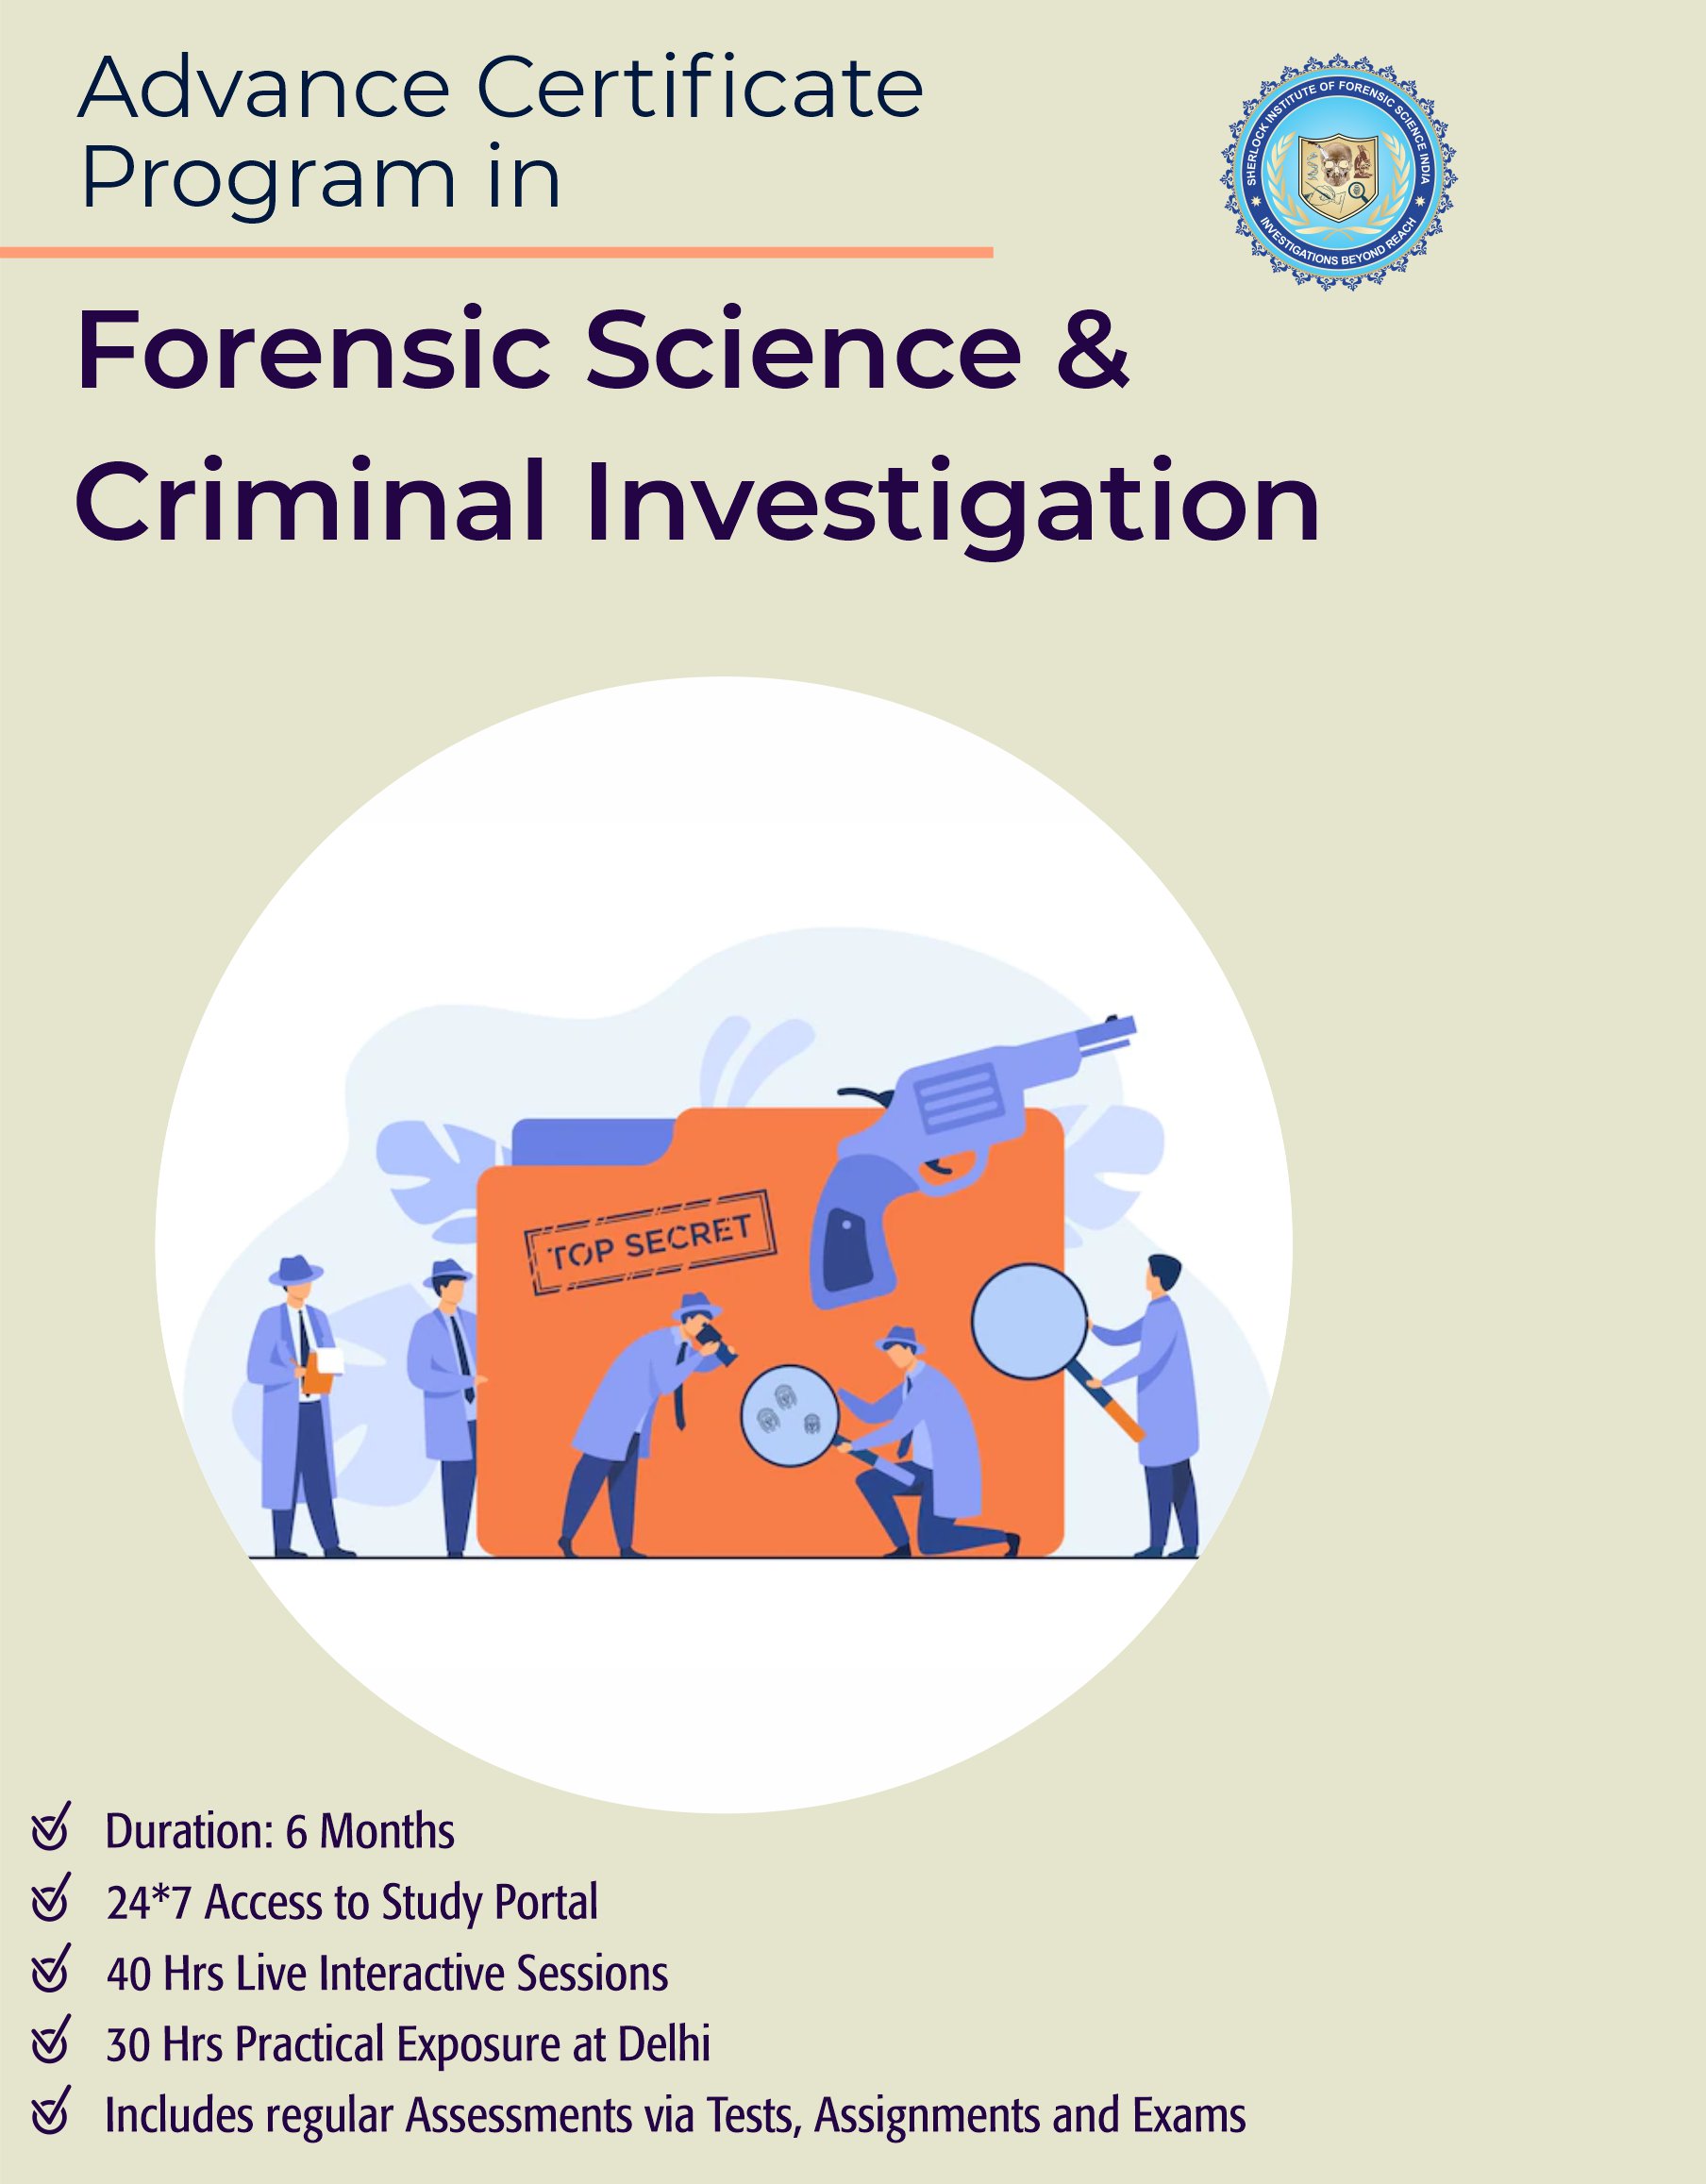 Forensic Science and Criminal Investigation